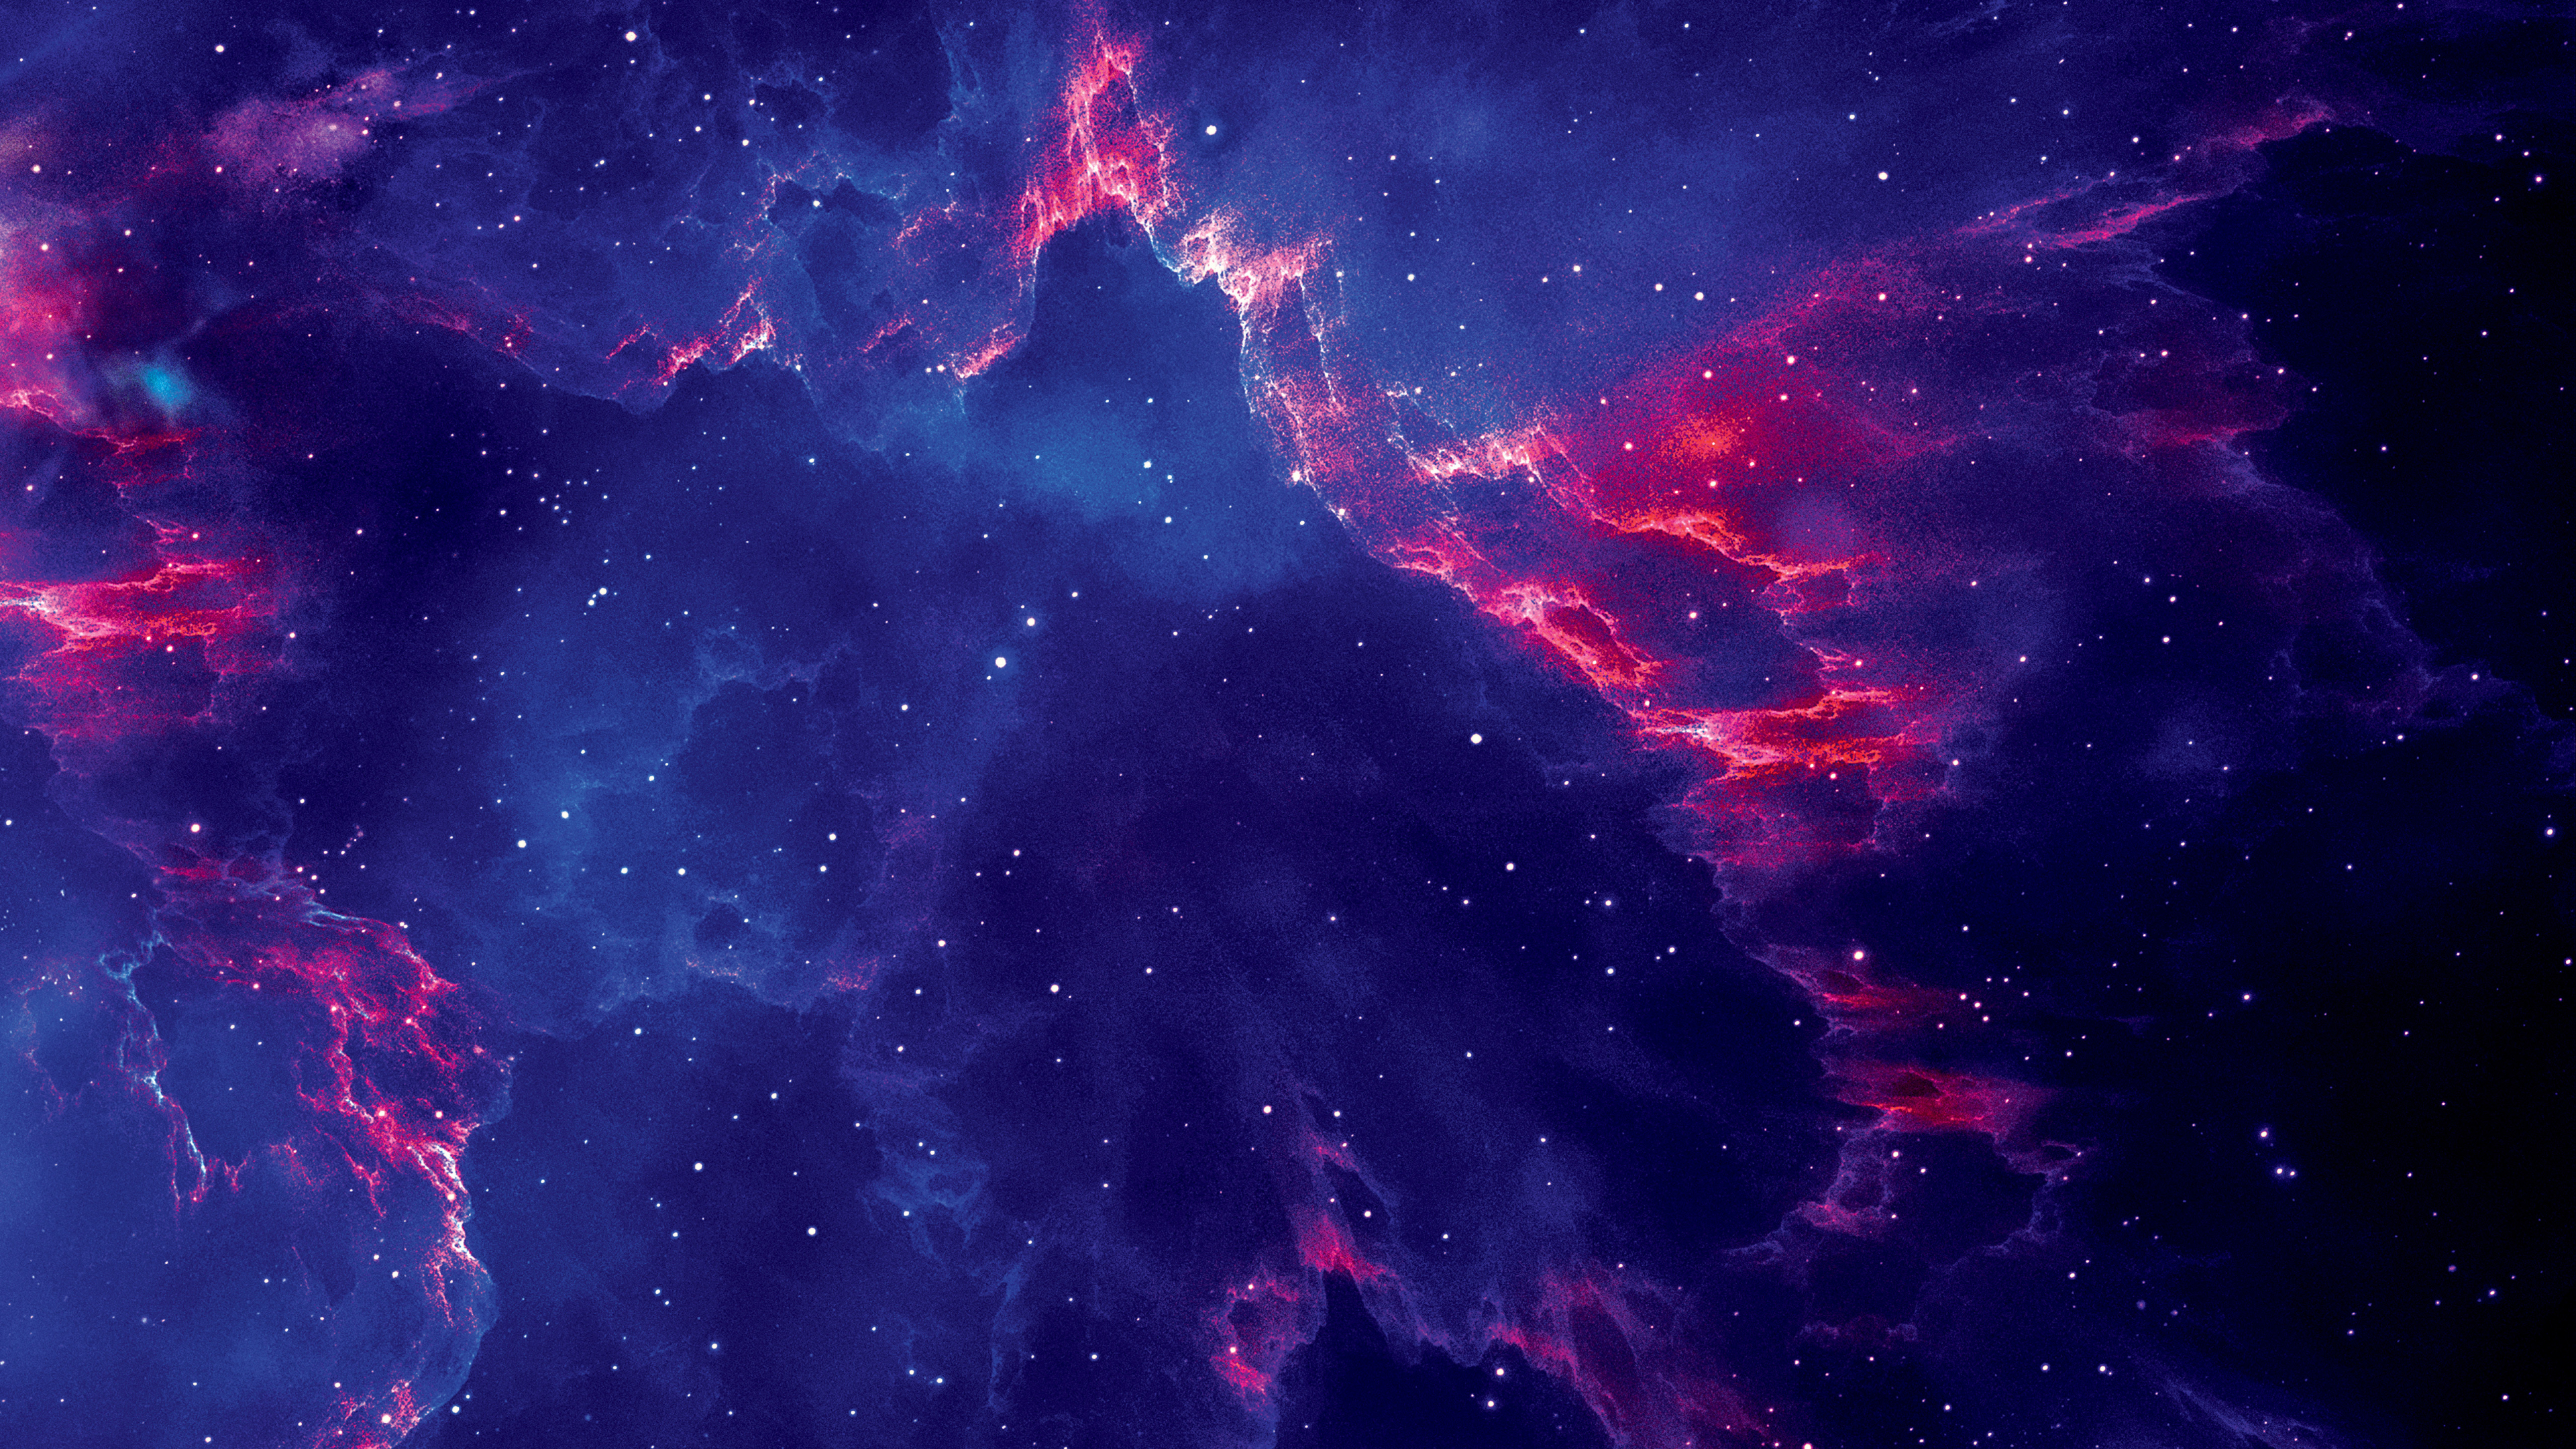 Download 3840x2160 wallpaper starry and cloudy, cosmos, galaxy, clouds, 4k, uhd 16: widescreen, 3840x2160 HD image, background, 21030